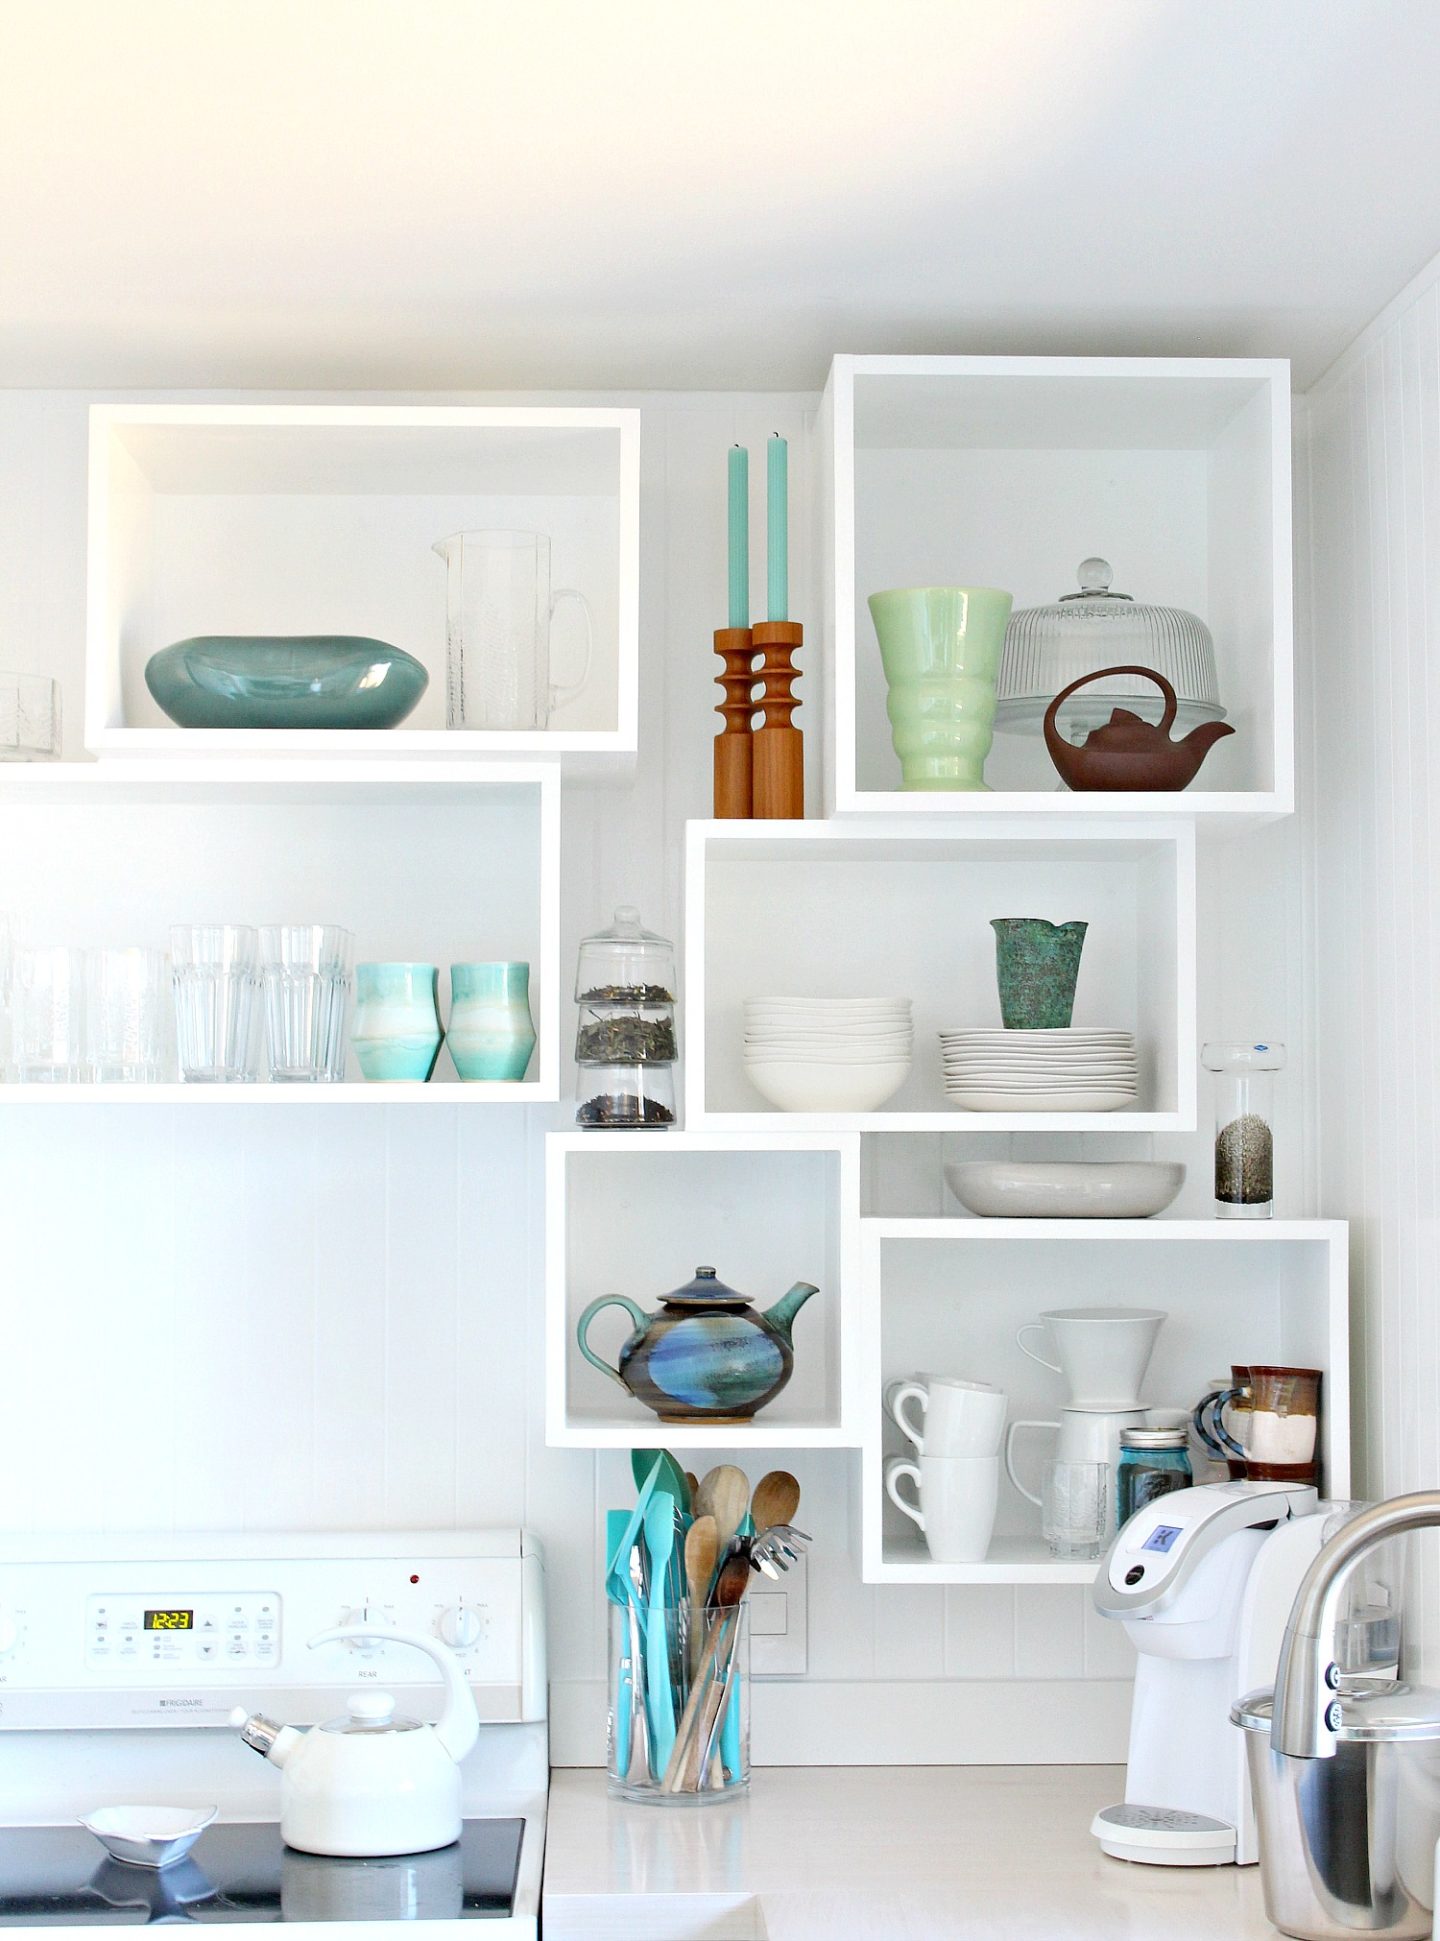 How to Build Wall Cubbies | Fresh Take on Kitchen Open Shelving. Learn How to Build DIY Wall Cubbies for Extra Storage! #diystorage #diyproject #diykitchen